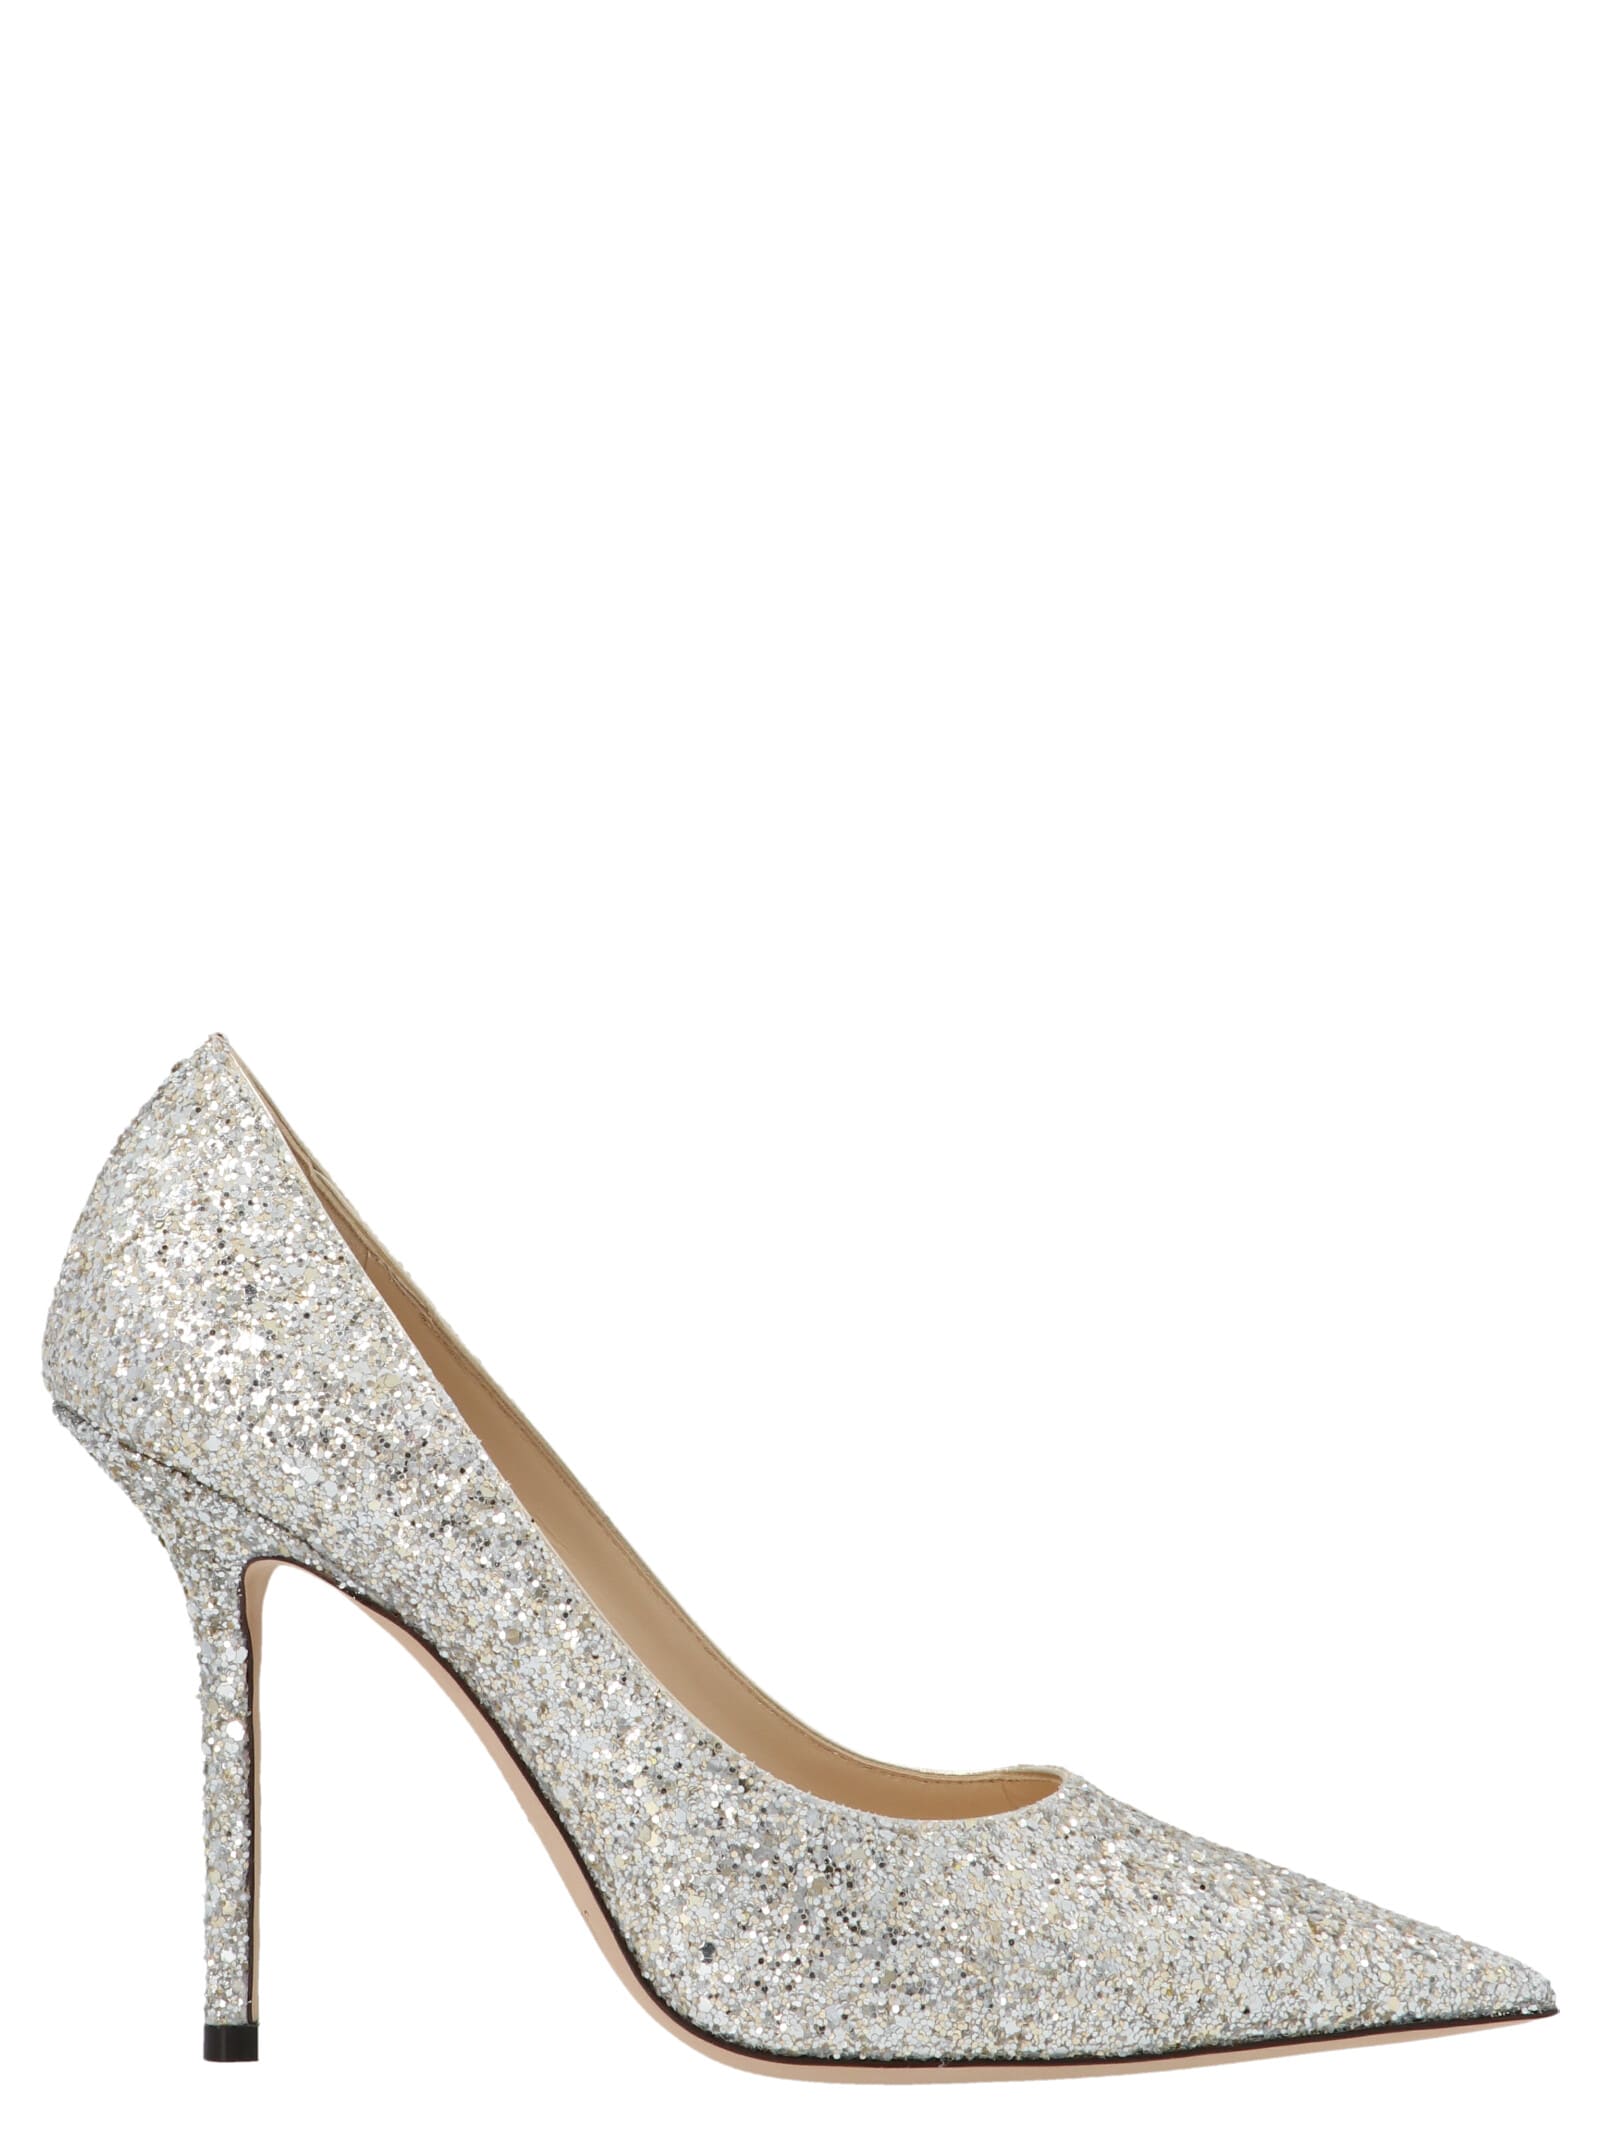 Buy Jimmy Choo love 100 Lld Shoes online, shop Jimmy Choo shoes with free shipping